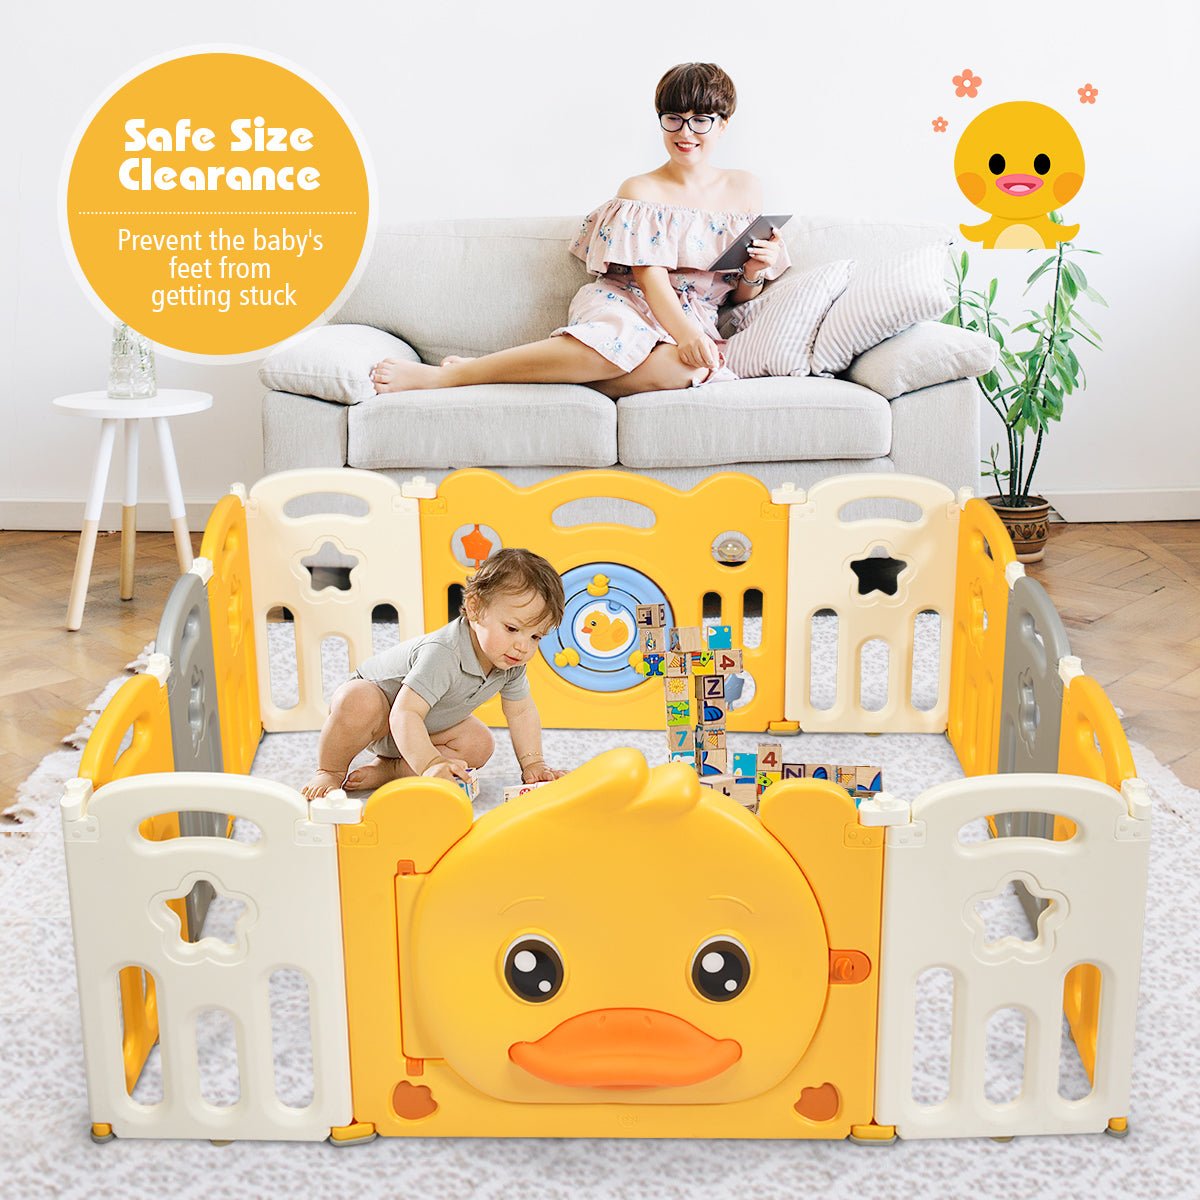 Easy Assembly and Storage - Foldable Baby Playpen